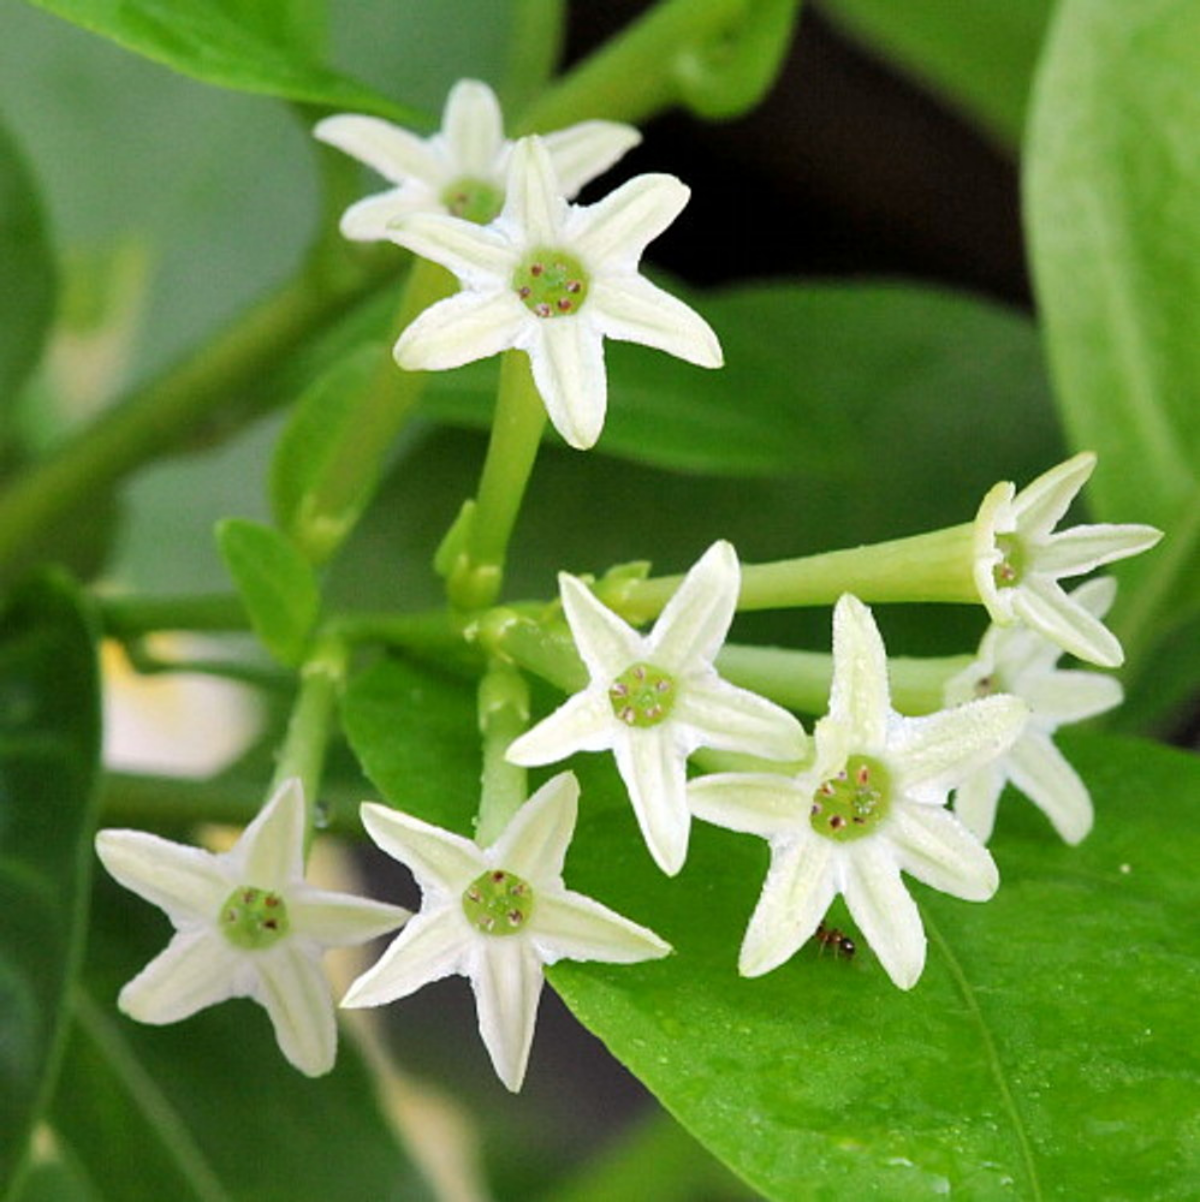 up close flowers from night blooming jasmine